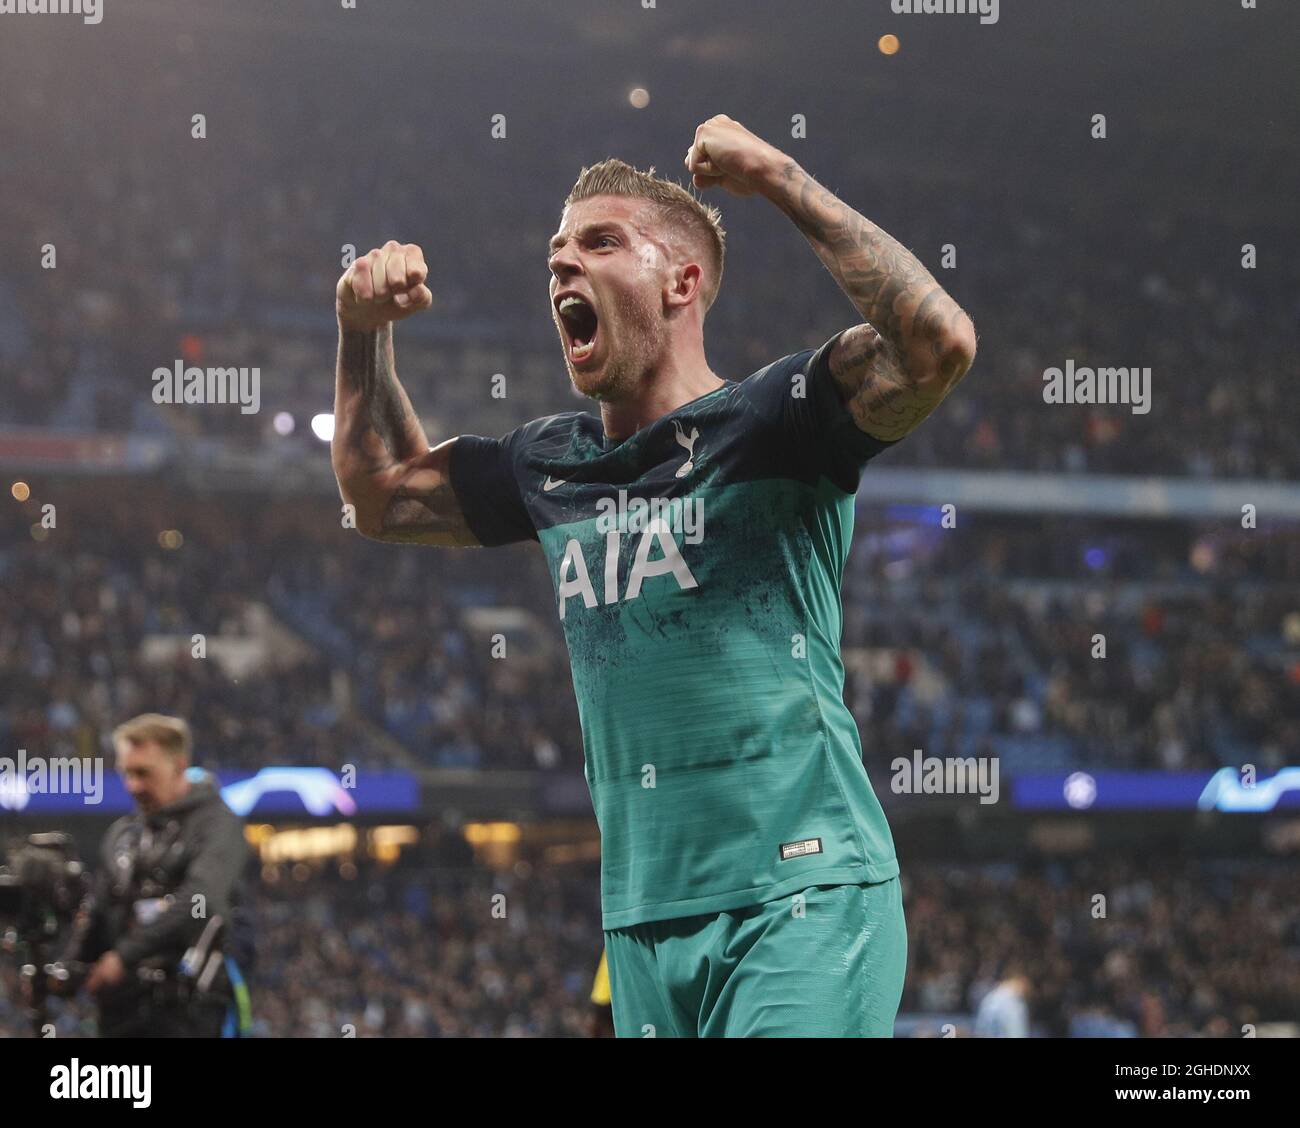 Toby Alderweireld of Tottenham celebrates the win during the UEFA Champions League match at the Etihad Stadium, Manchester. Picture date: 17th April 2019. Picture credit should read: Darren Staples/Sportimage via PA Images Stock Photo